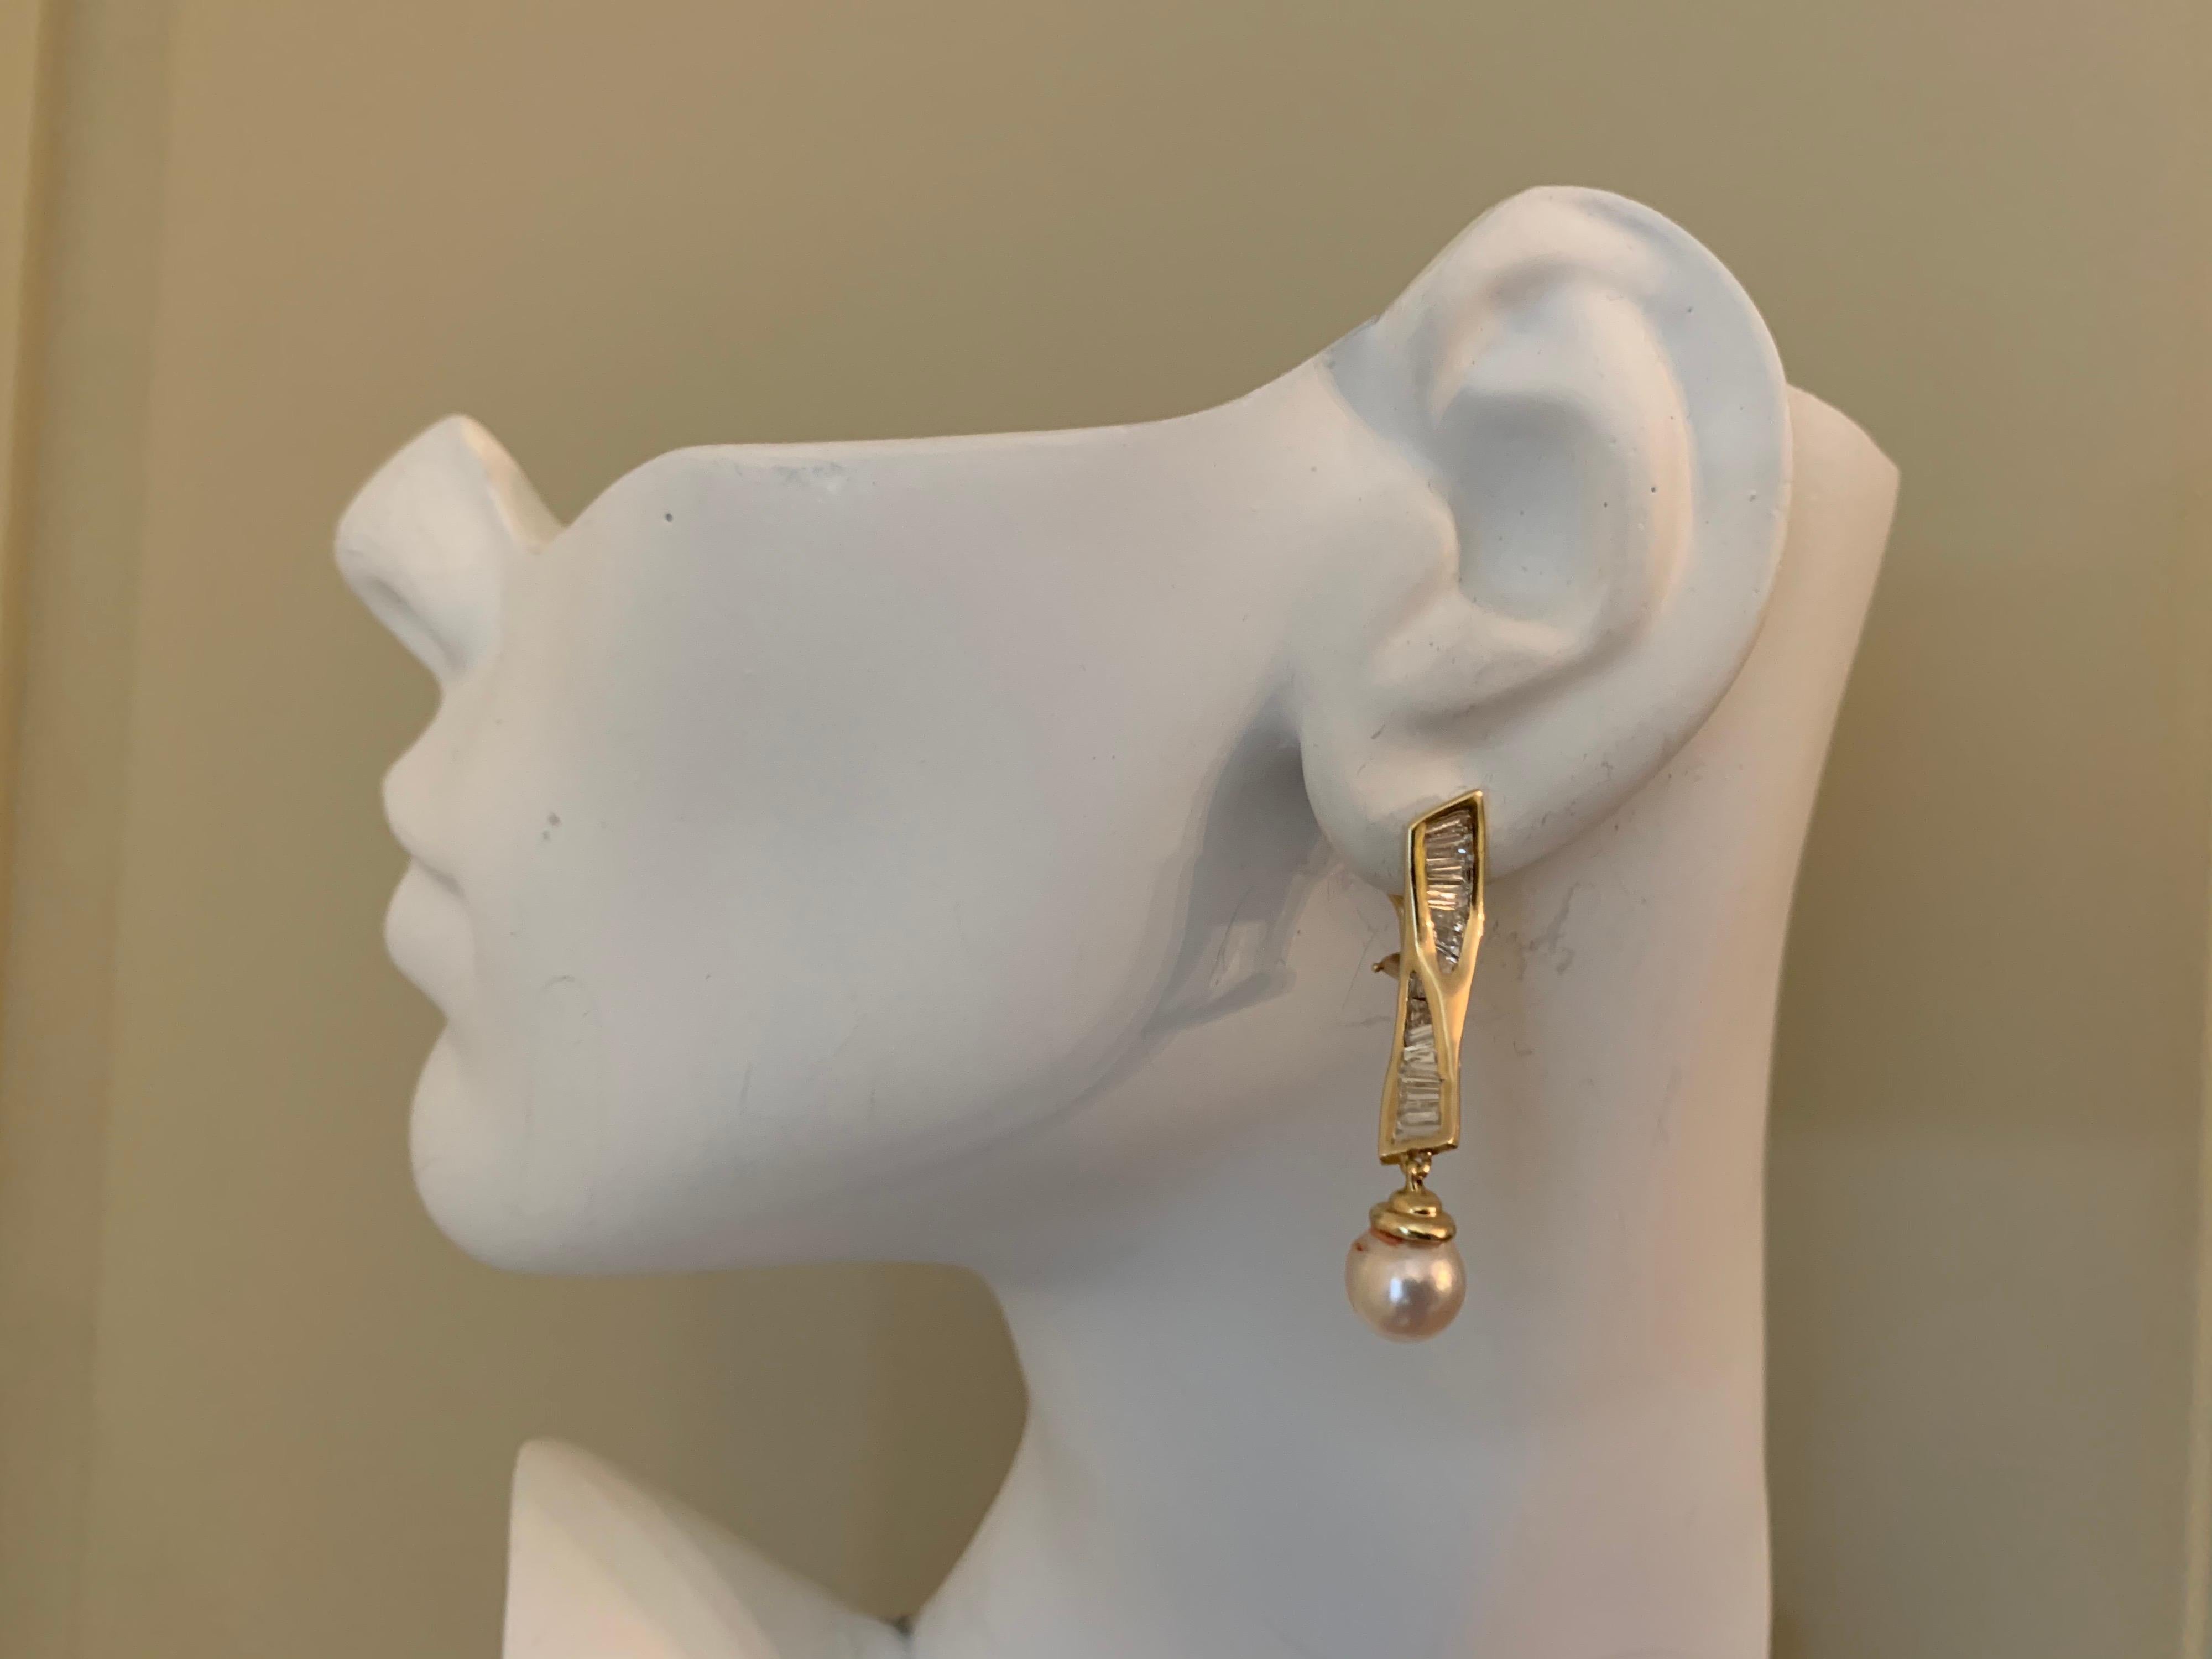 Retro Gold Earrings 1.50 Carat Natural Baguette Diamond and Pearl, circa 1970 For Sale 3